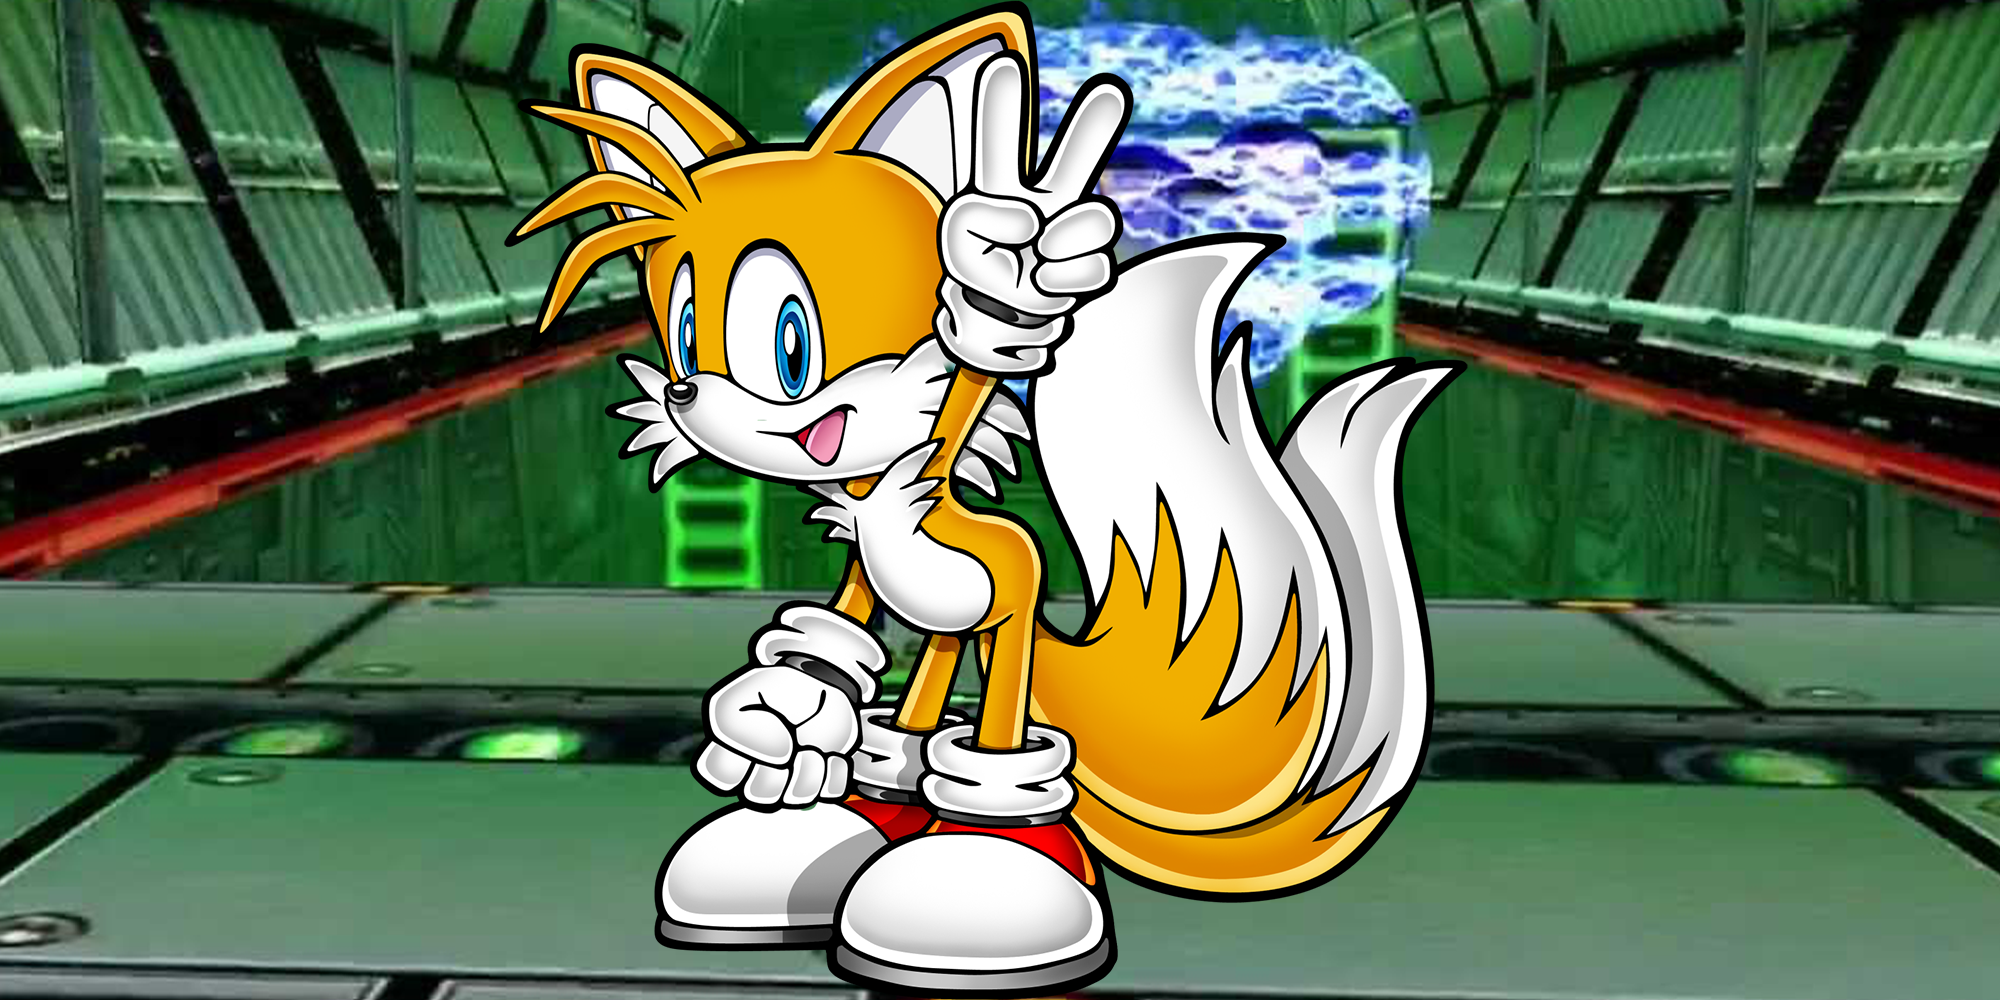 official art of Tails the Fox against backdrop of Space Colony ark's interior